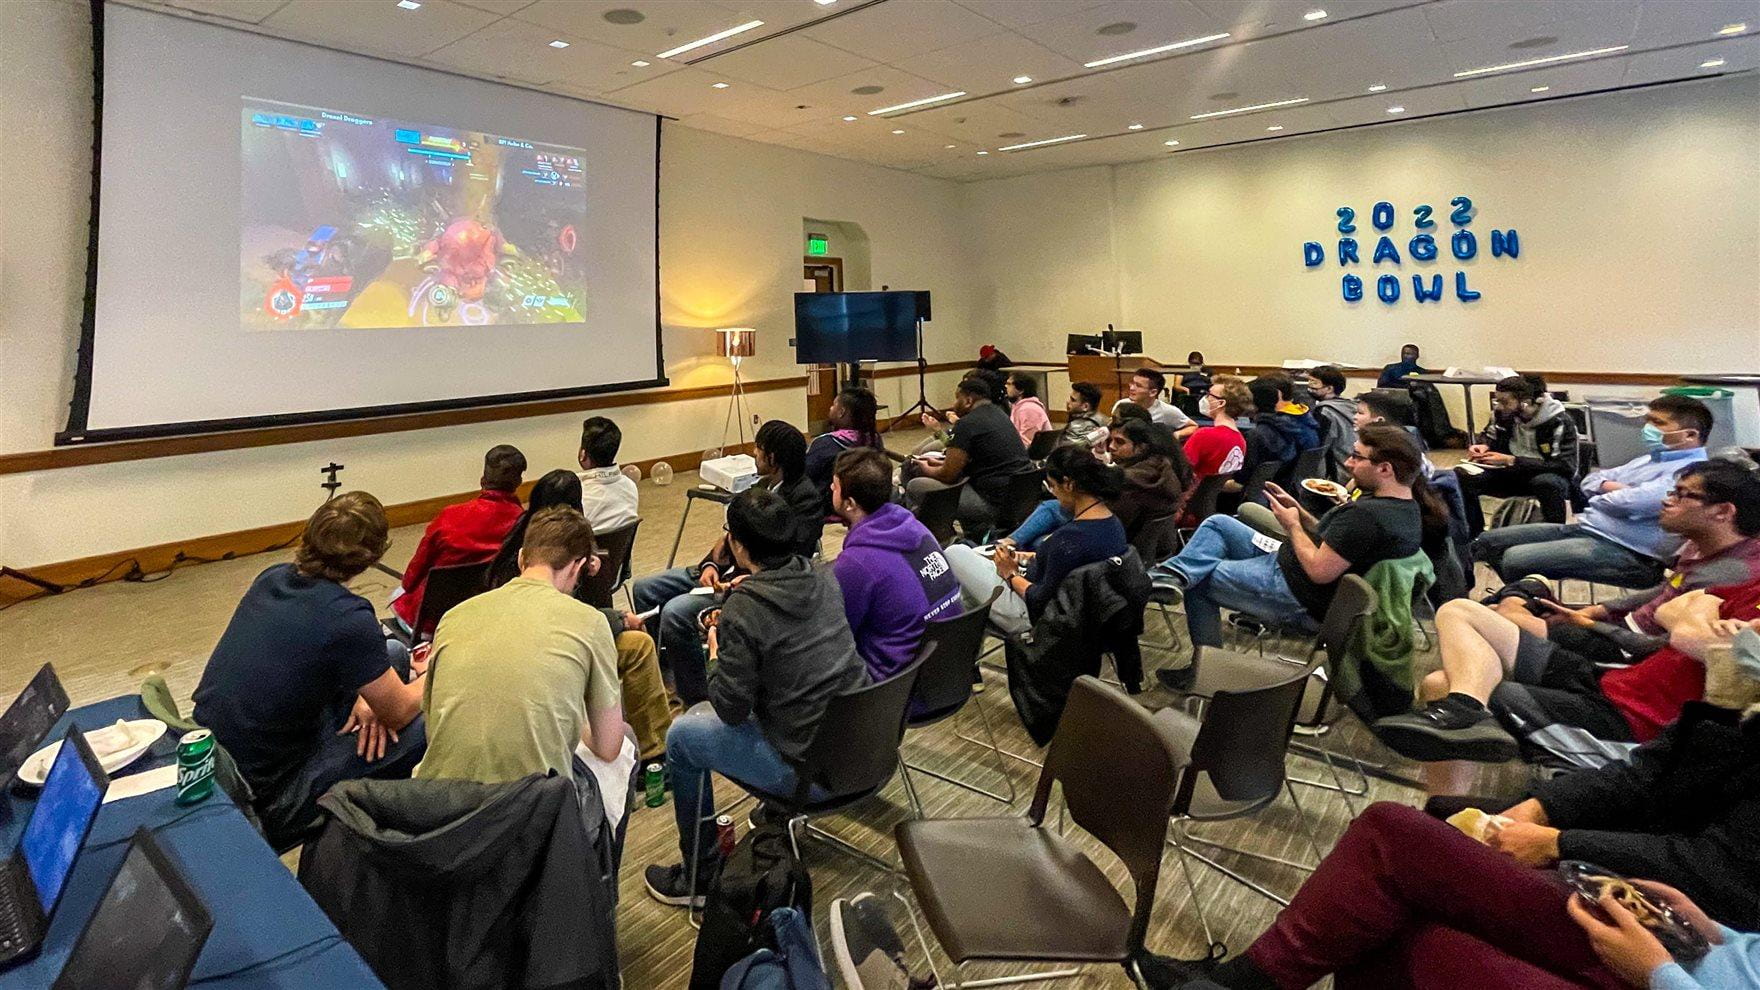 Drexel students played, watched and served as research subjects at the 2022 Dragon Bowl on April 1. Photo credit: Loren Berckey.